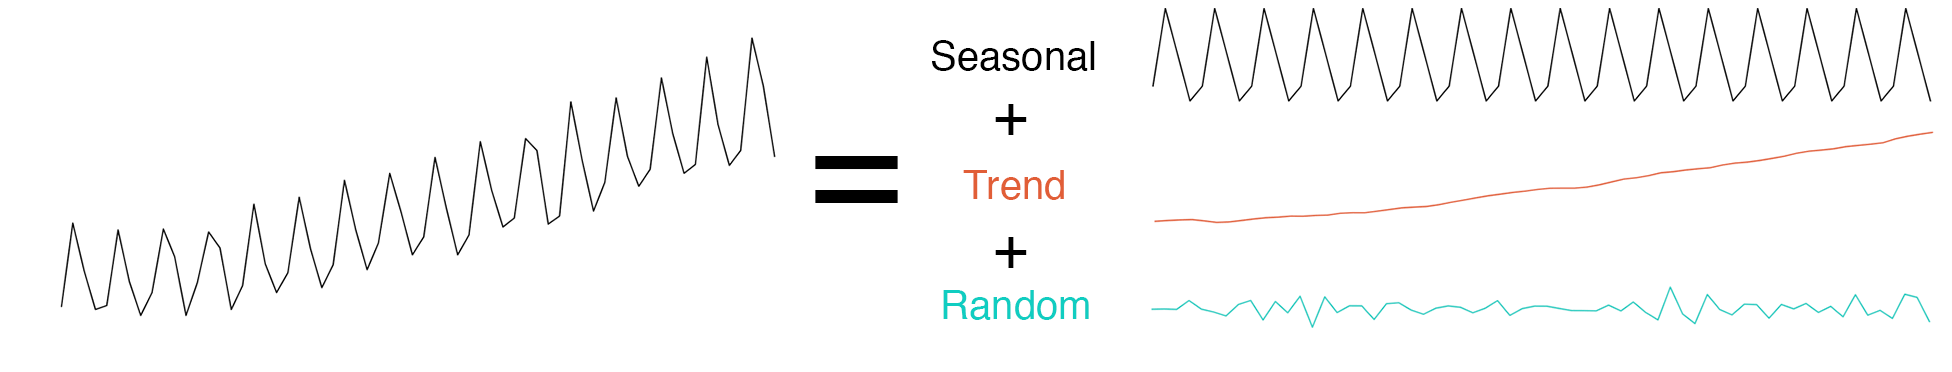 time-series-decomposition-seasonal-trend